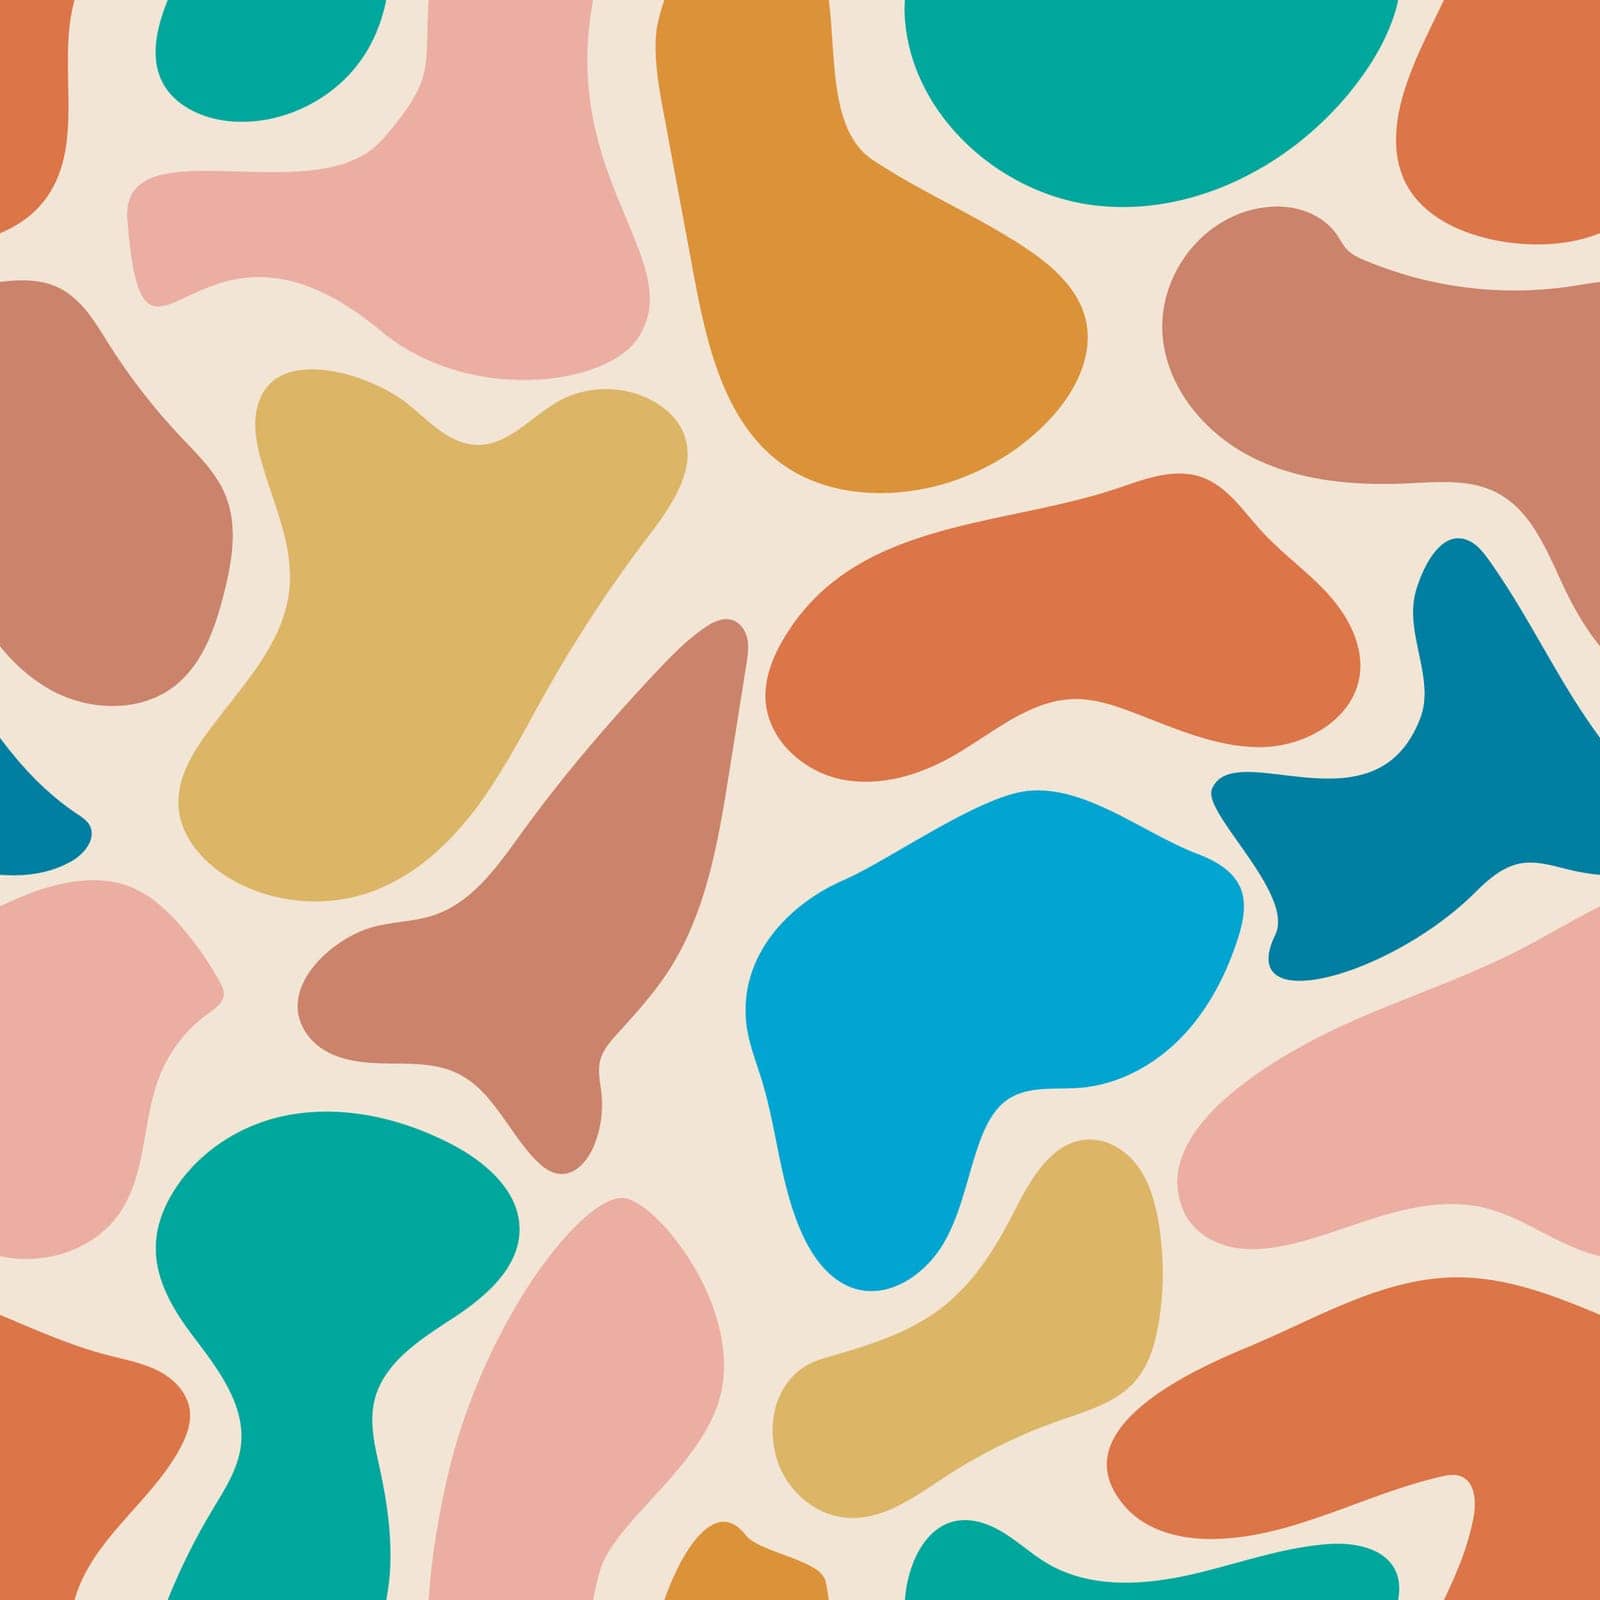 Naive playful abstract shapes seamless pattern by TassiaK